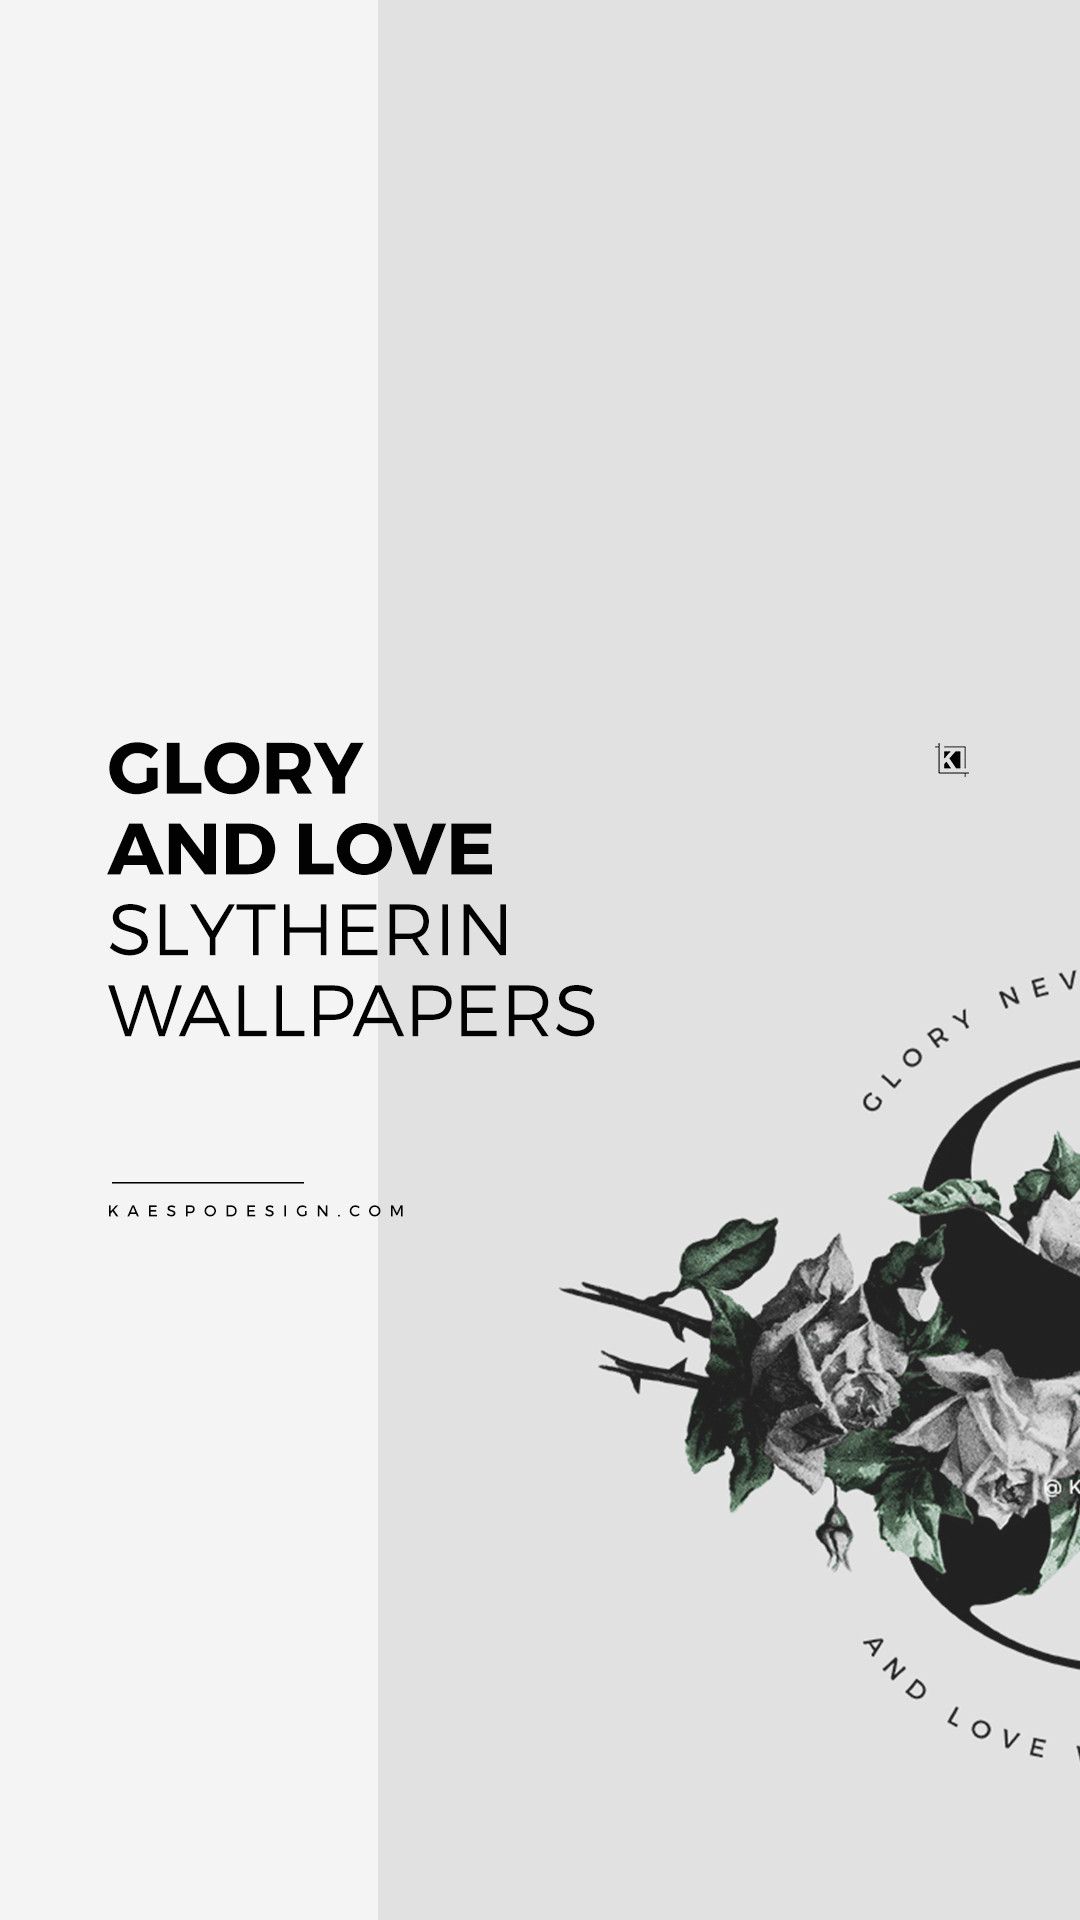 Glory and love slither wallpapers - Harry Potter, Slytherin